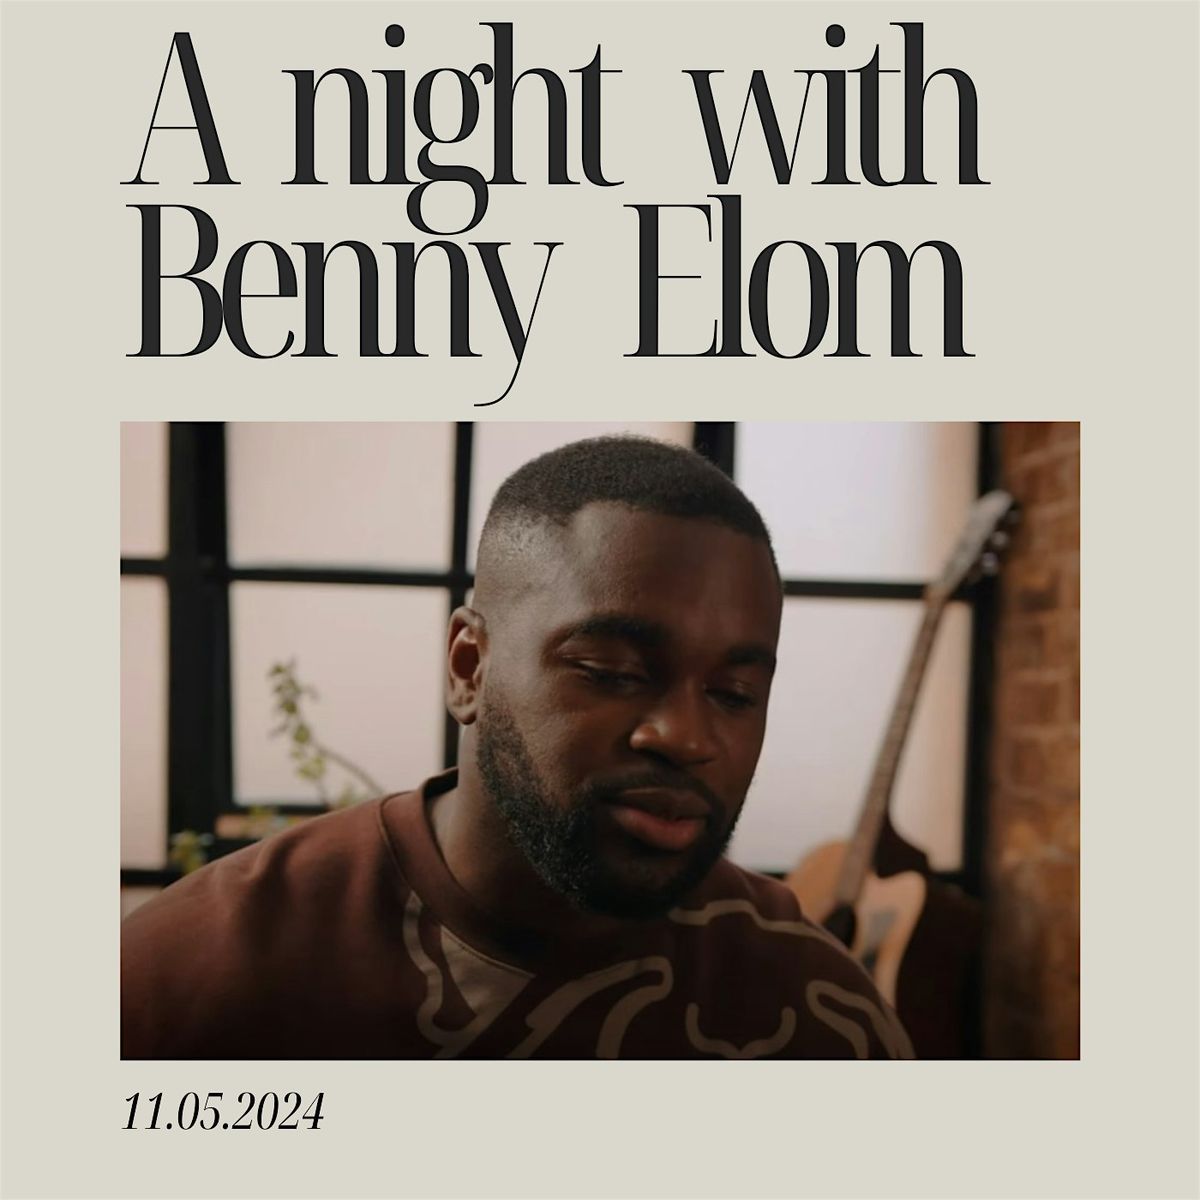 A night with Benny Elom and Sim